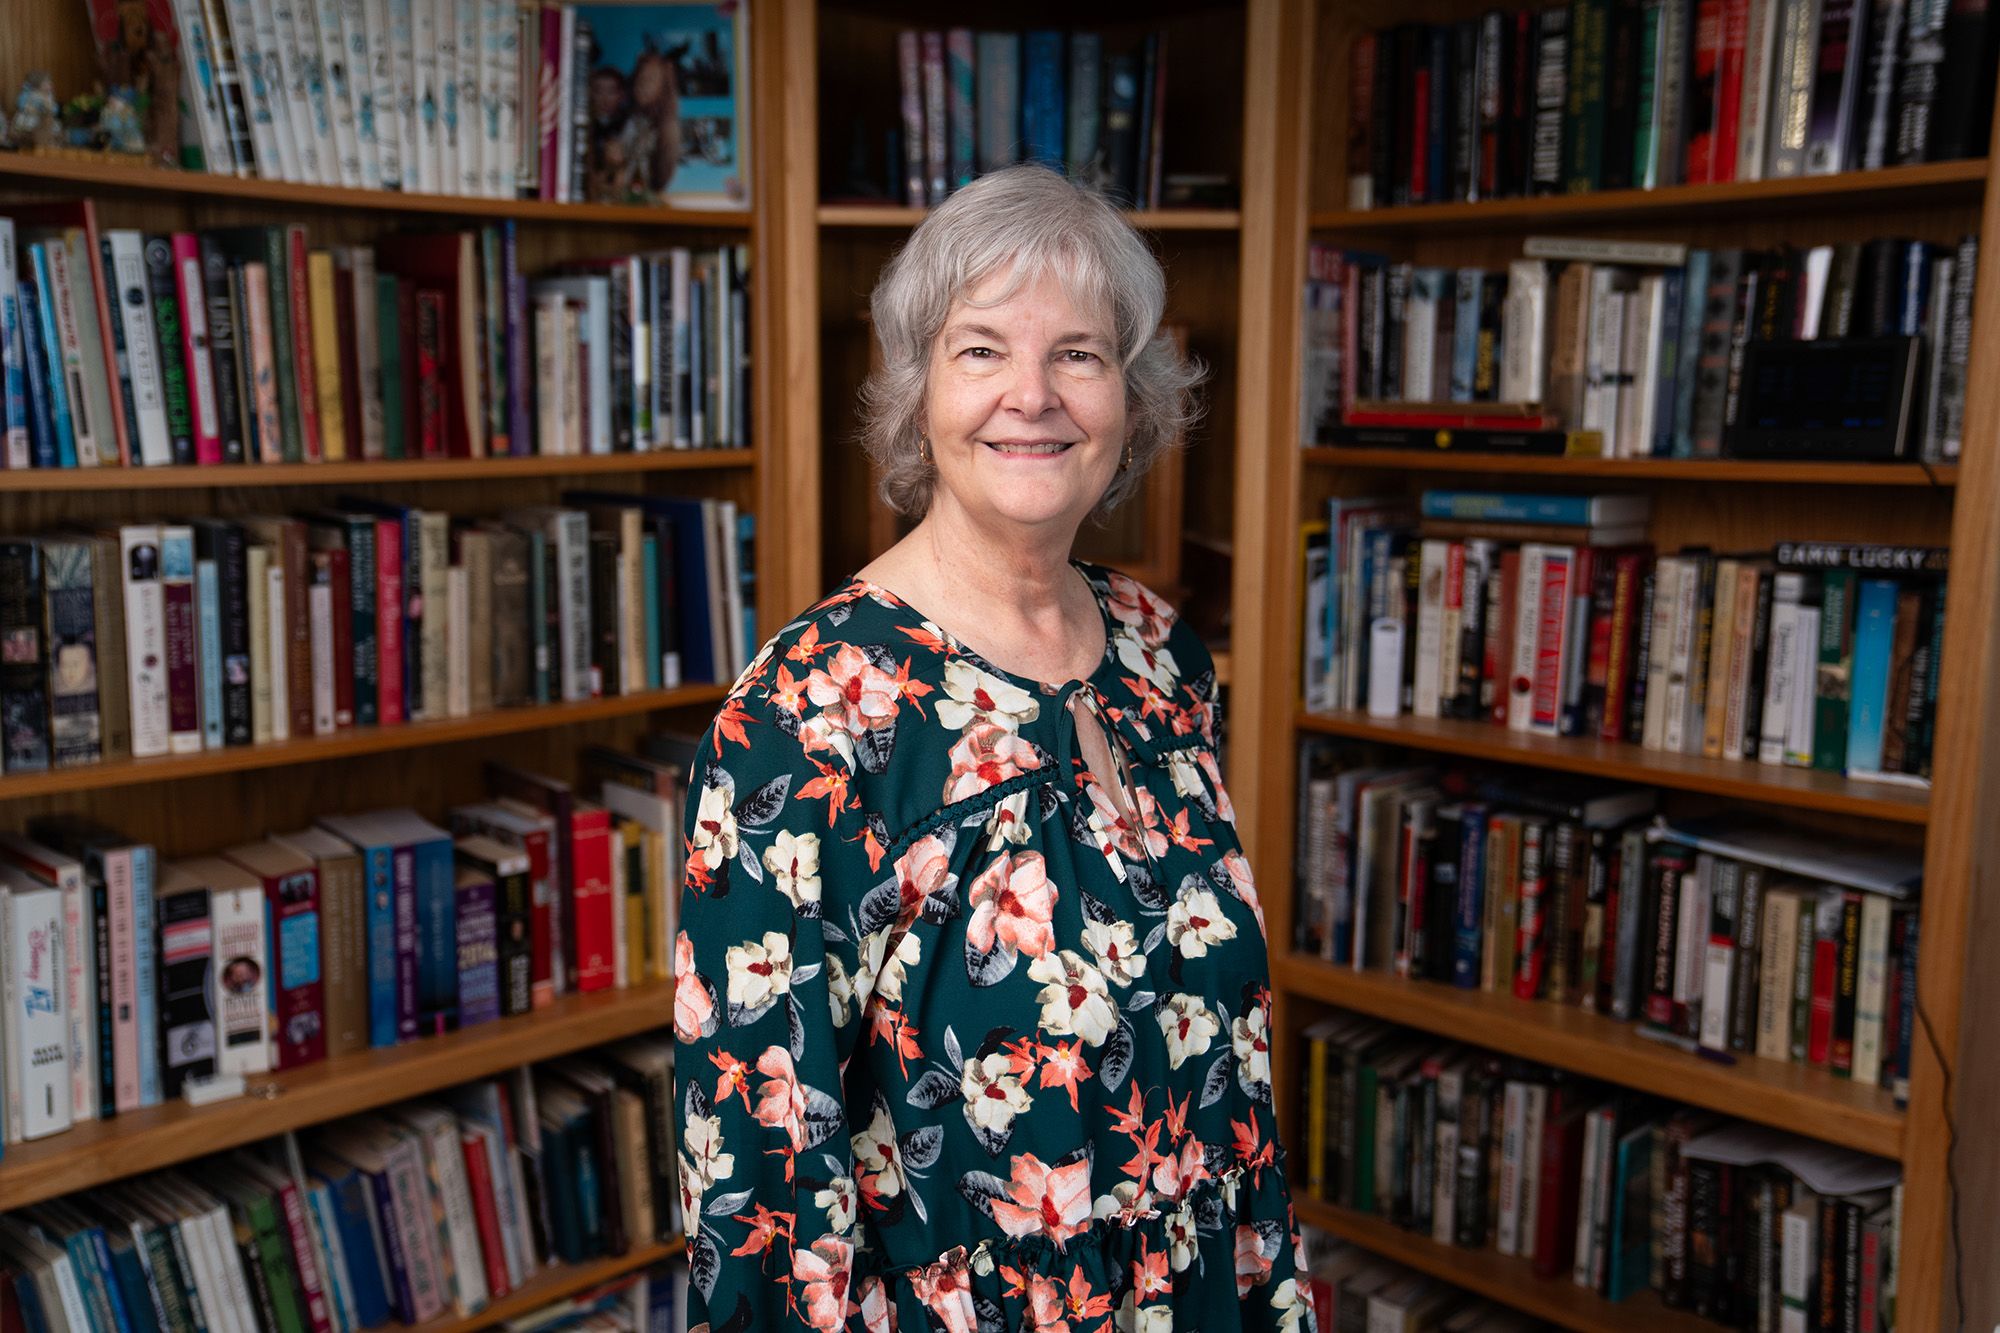 Alison McManus Walters stands in front of bookcases in a floral print shirt